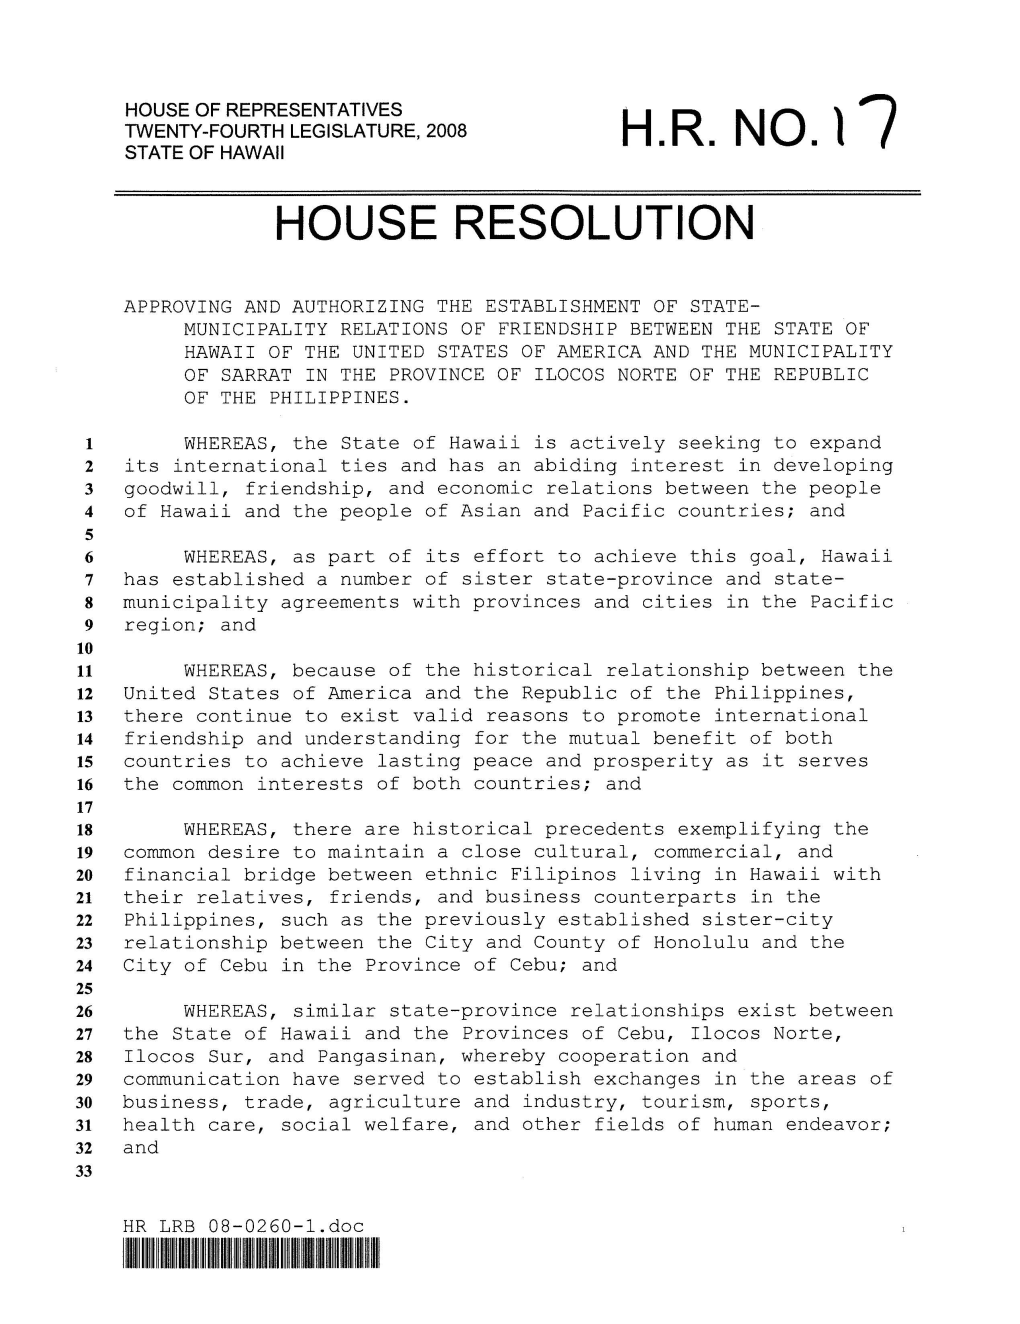 H.R. No. 11 State of Hawaii House Resolution